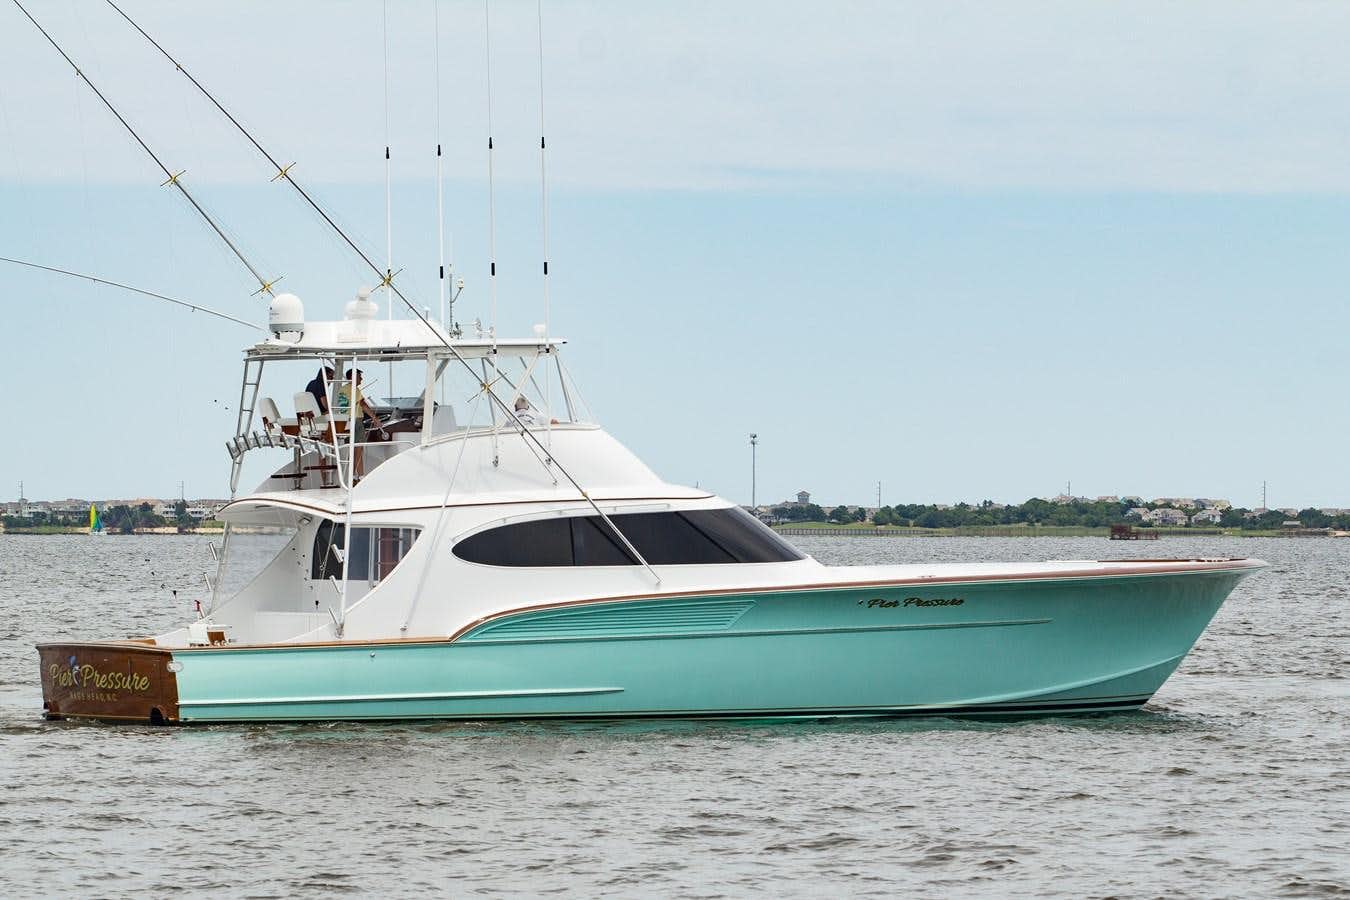 PIER PRESSURE Yacht for Sale in United States, 61' (18.59m) 2006 BILLY  HOLTON